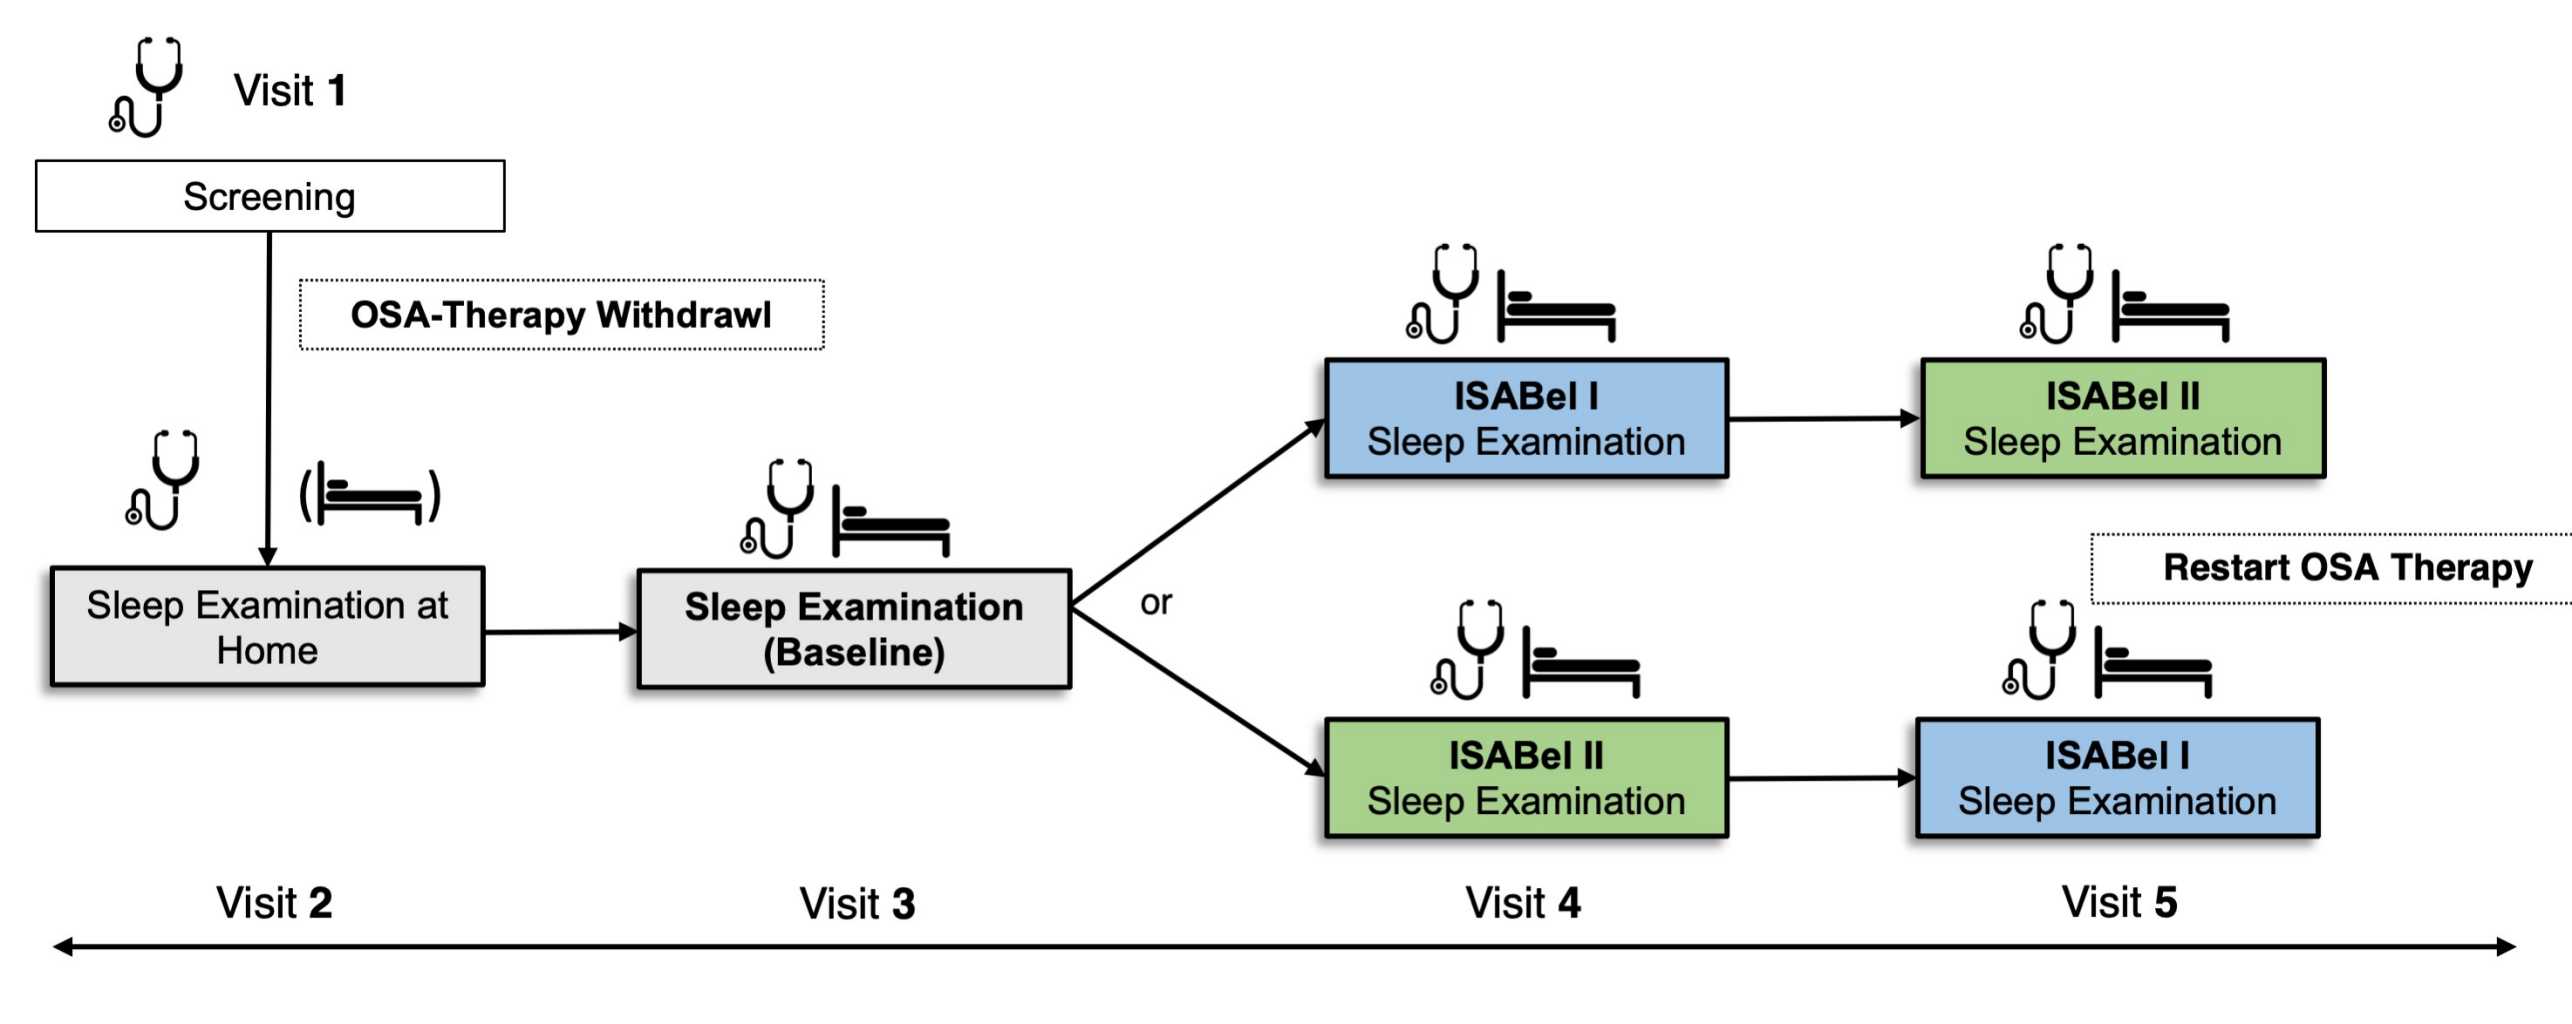 Enlarged view: flowchart that shows the screening workflow